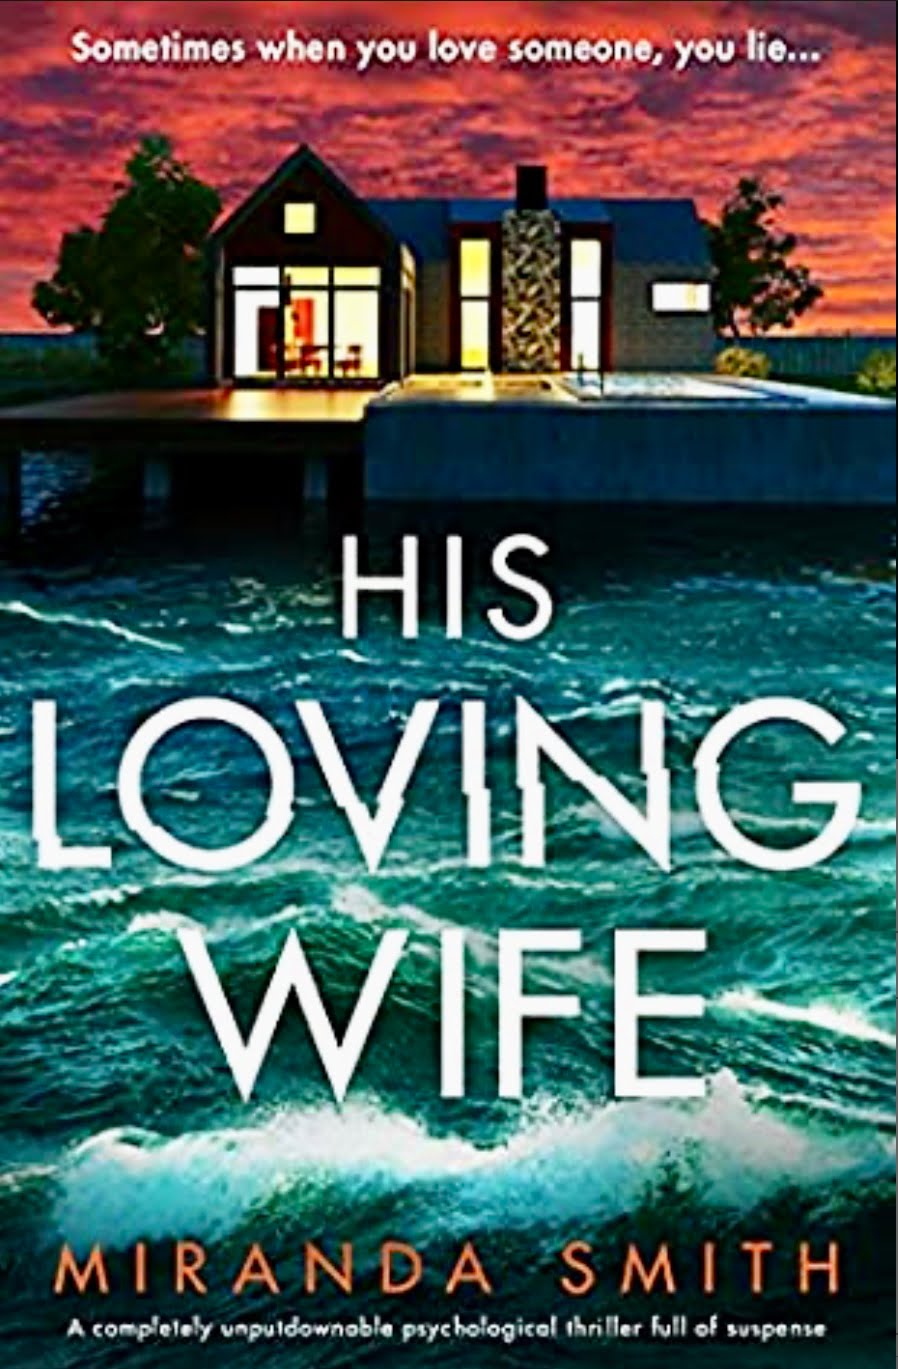 HIS LOVING WIFE BY MIRANDA SMITH – BOOK REVIEW